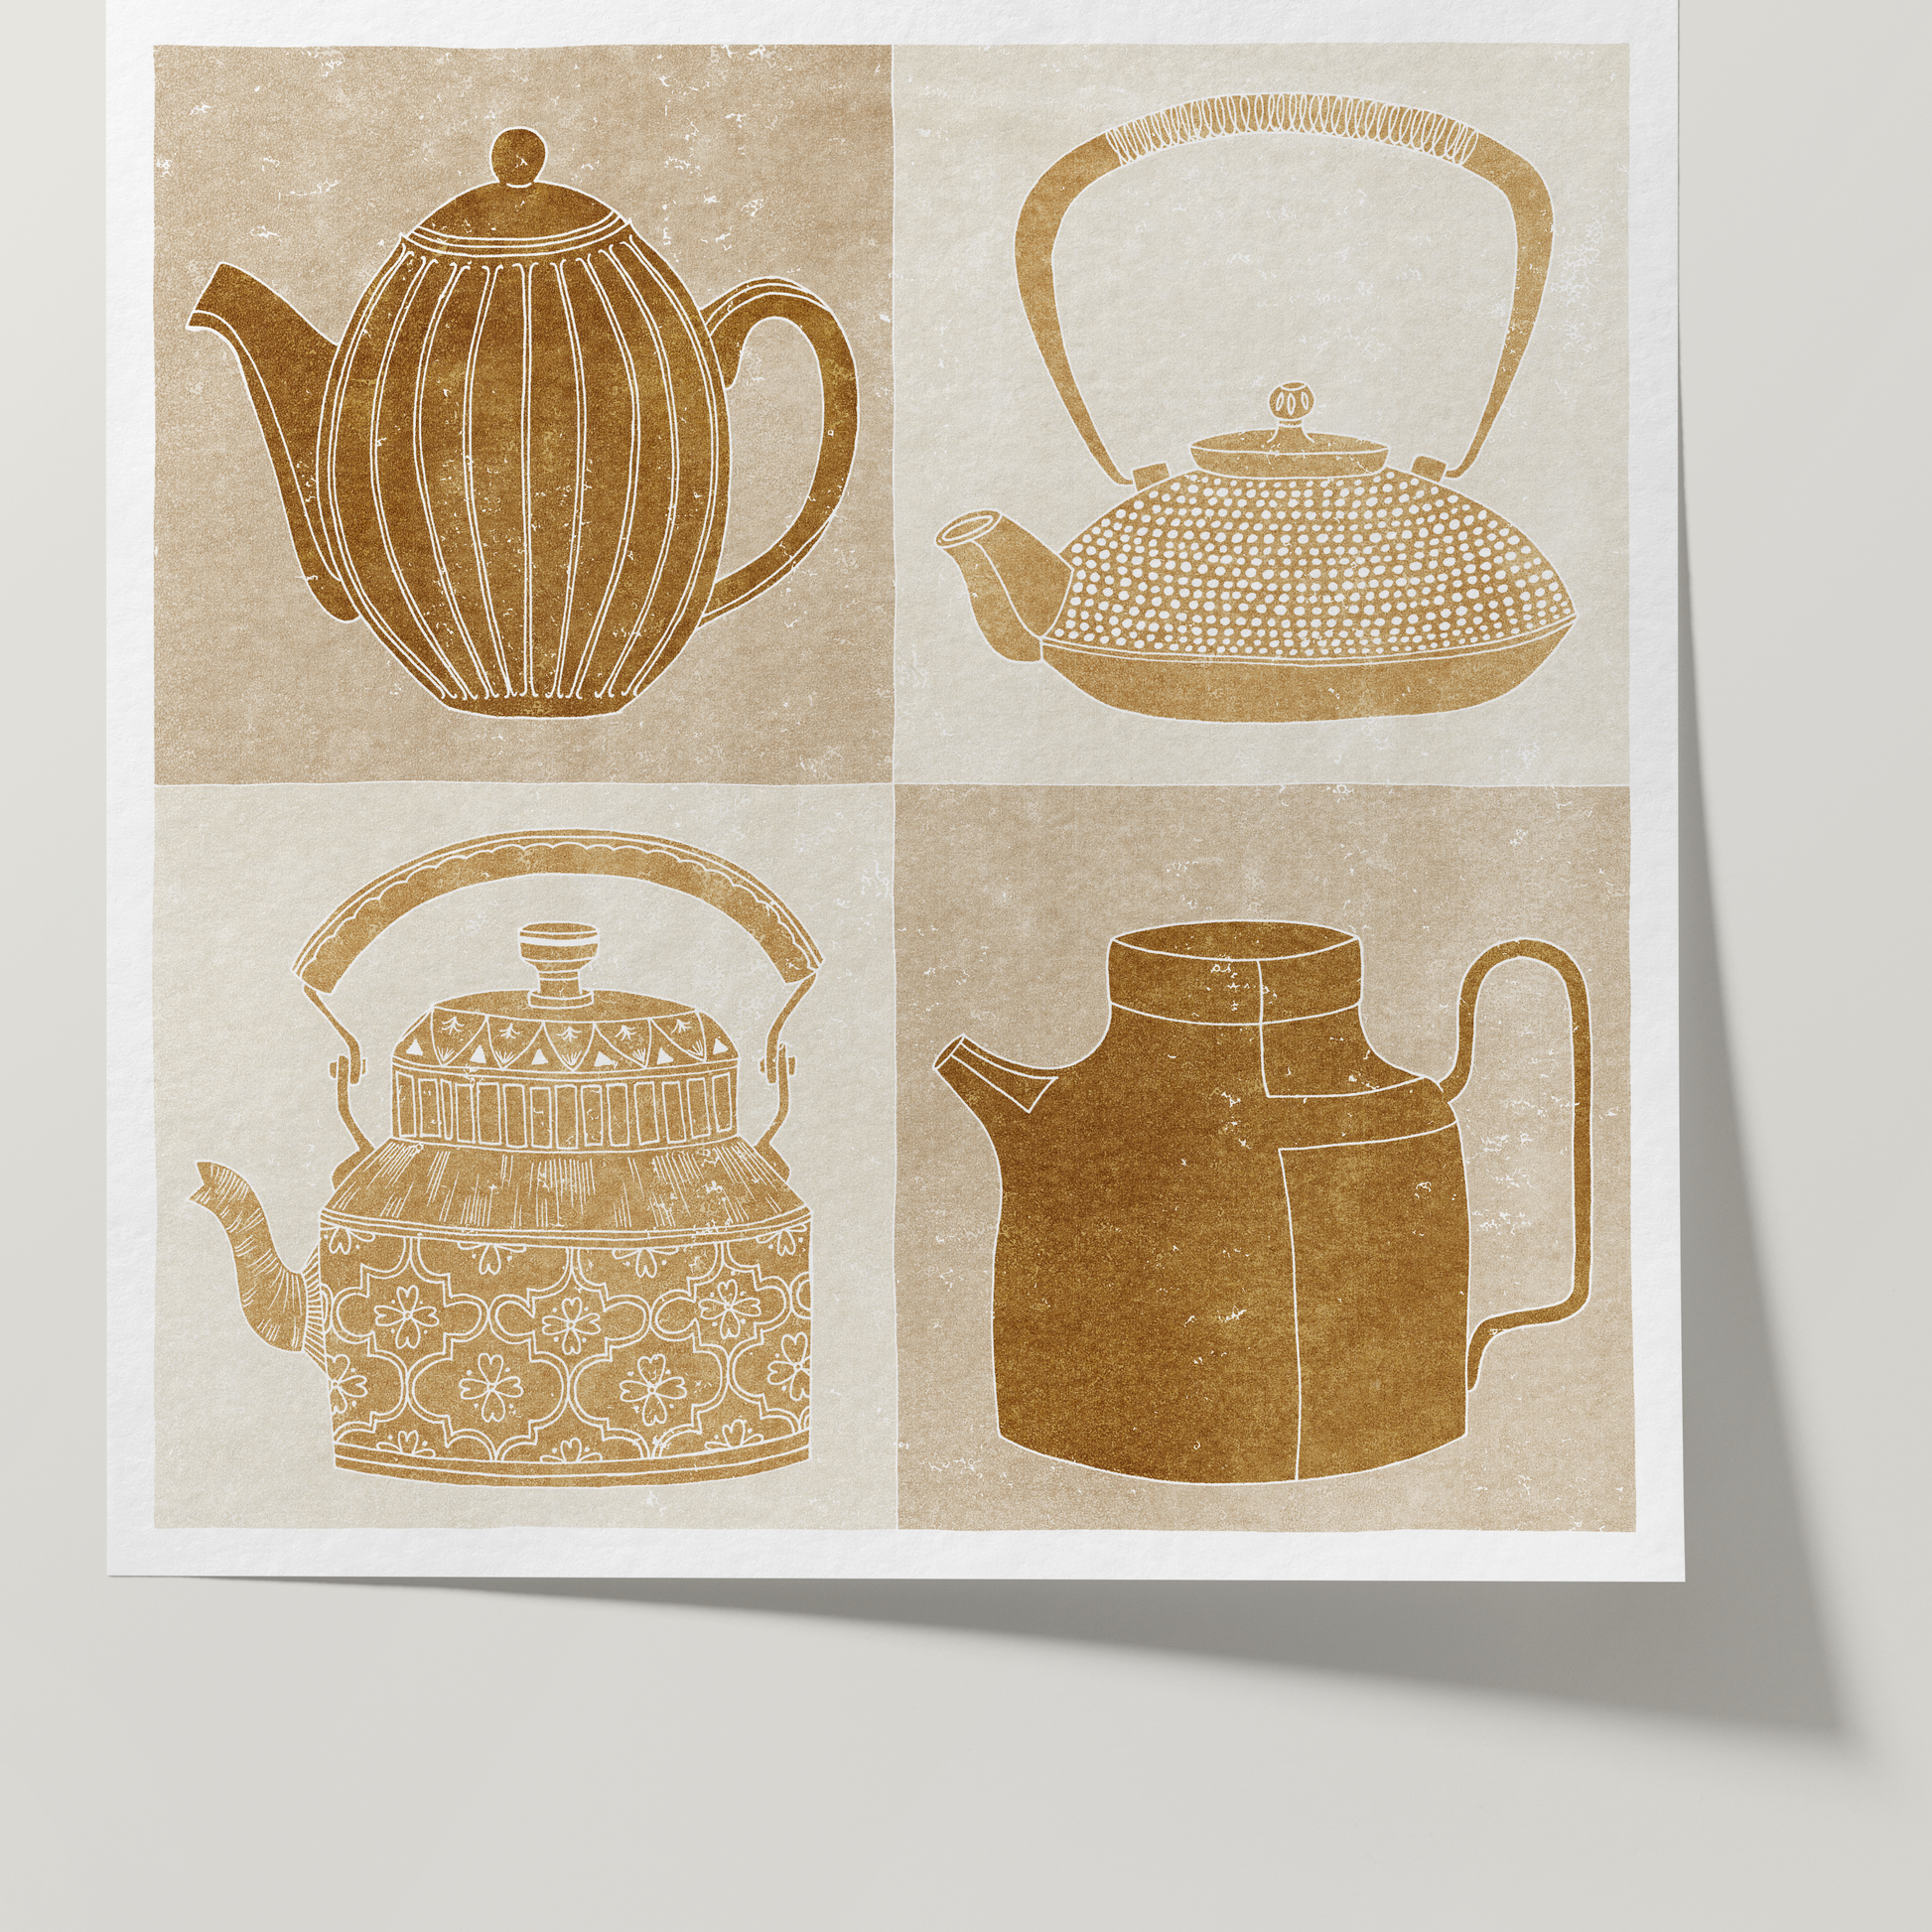 Home Decor Print - Giclee Print - Nature-inspired Prints - Teapots - Framed - Linocut Effect Illustration - Ochre = Hahnemühle German Etching Paper - Front